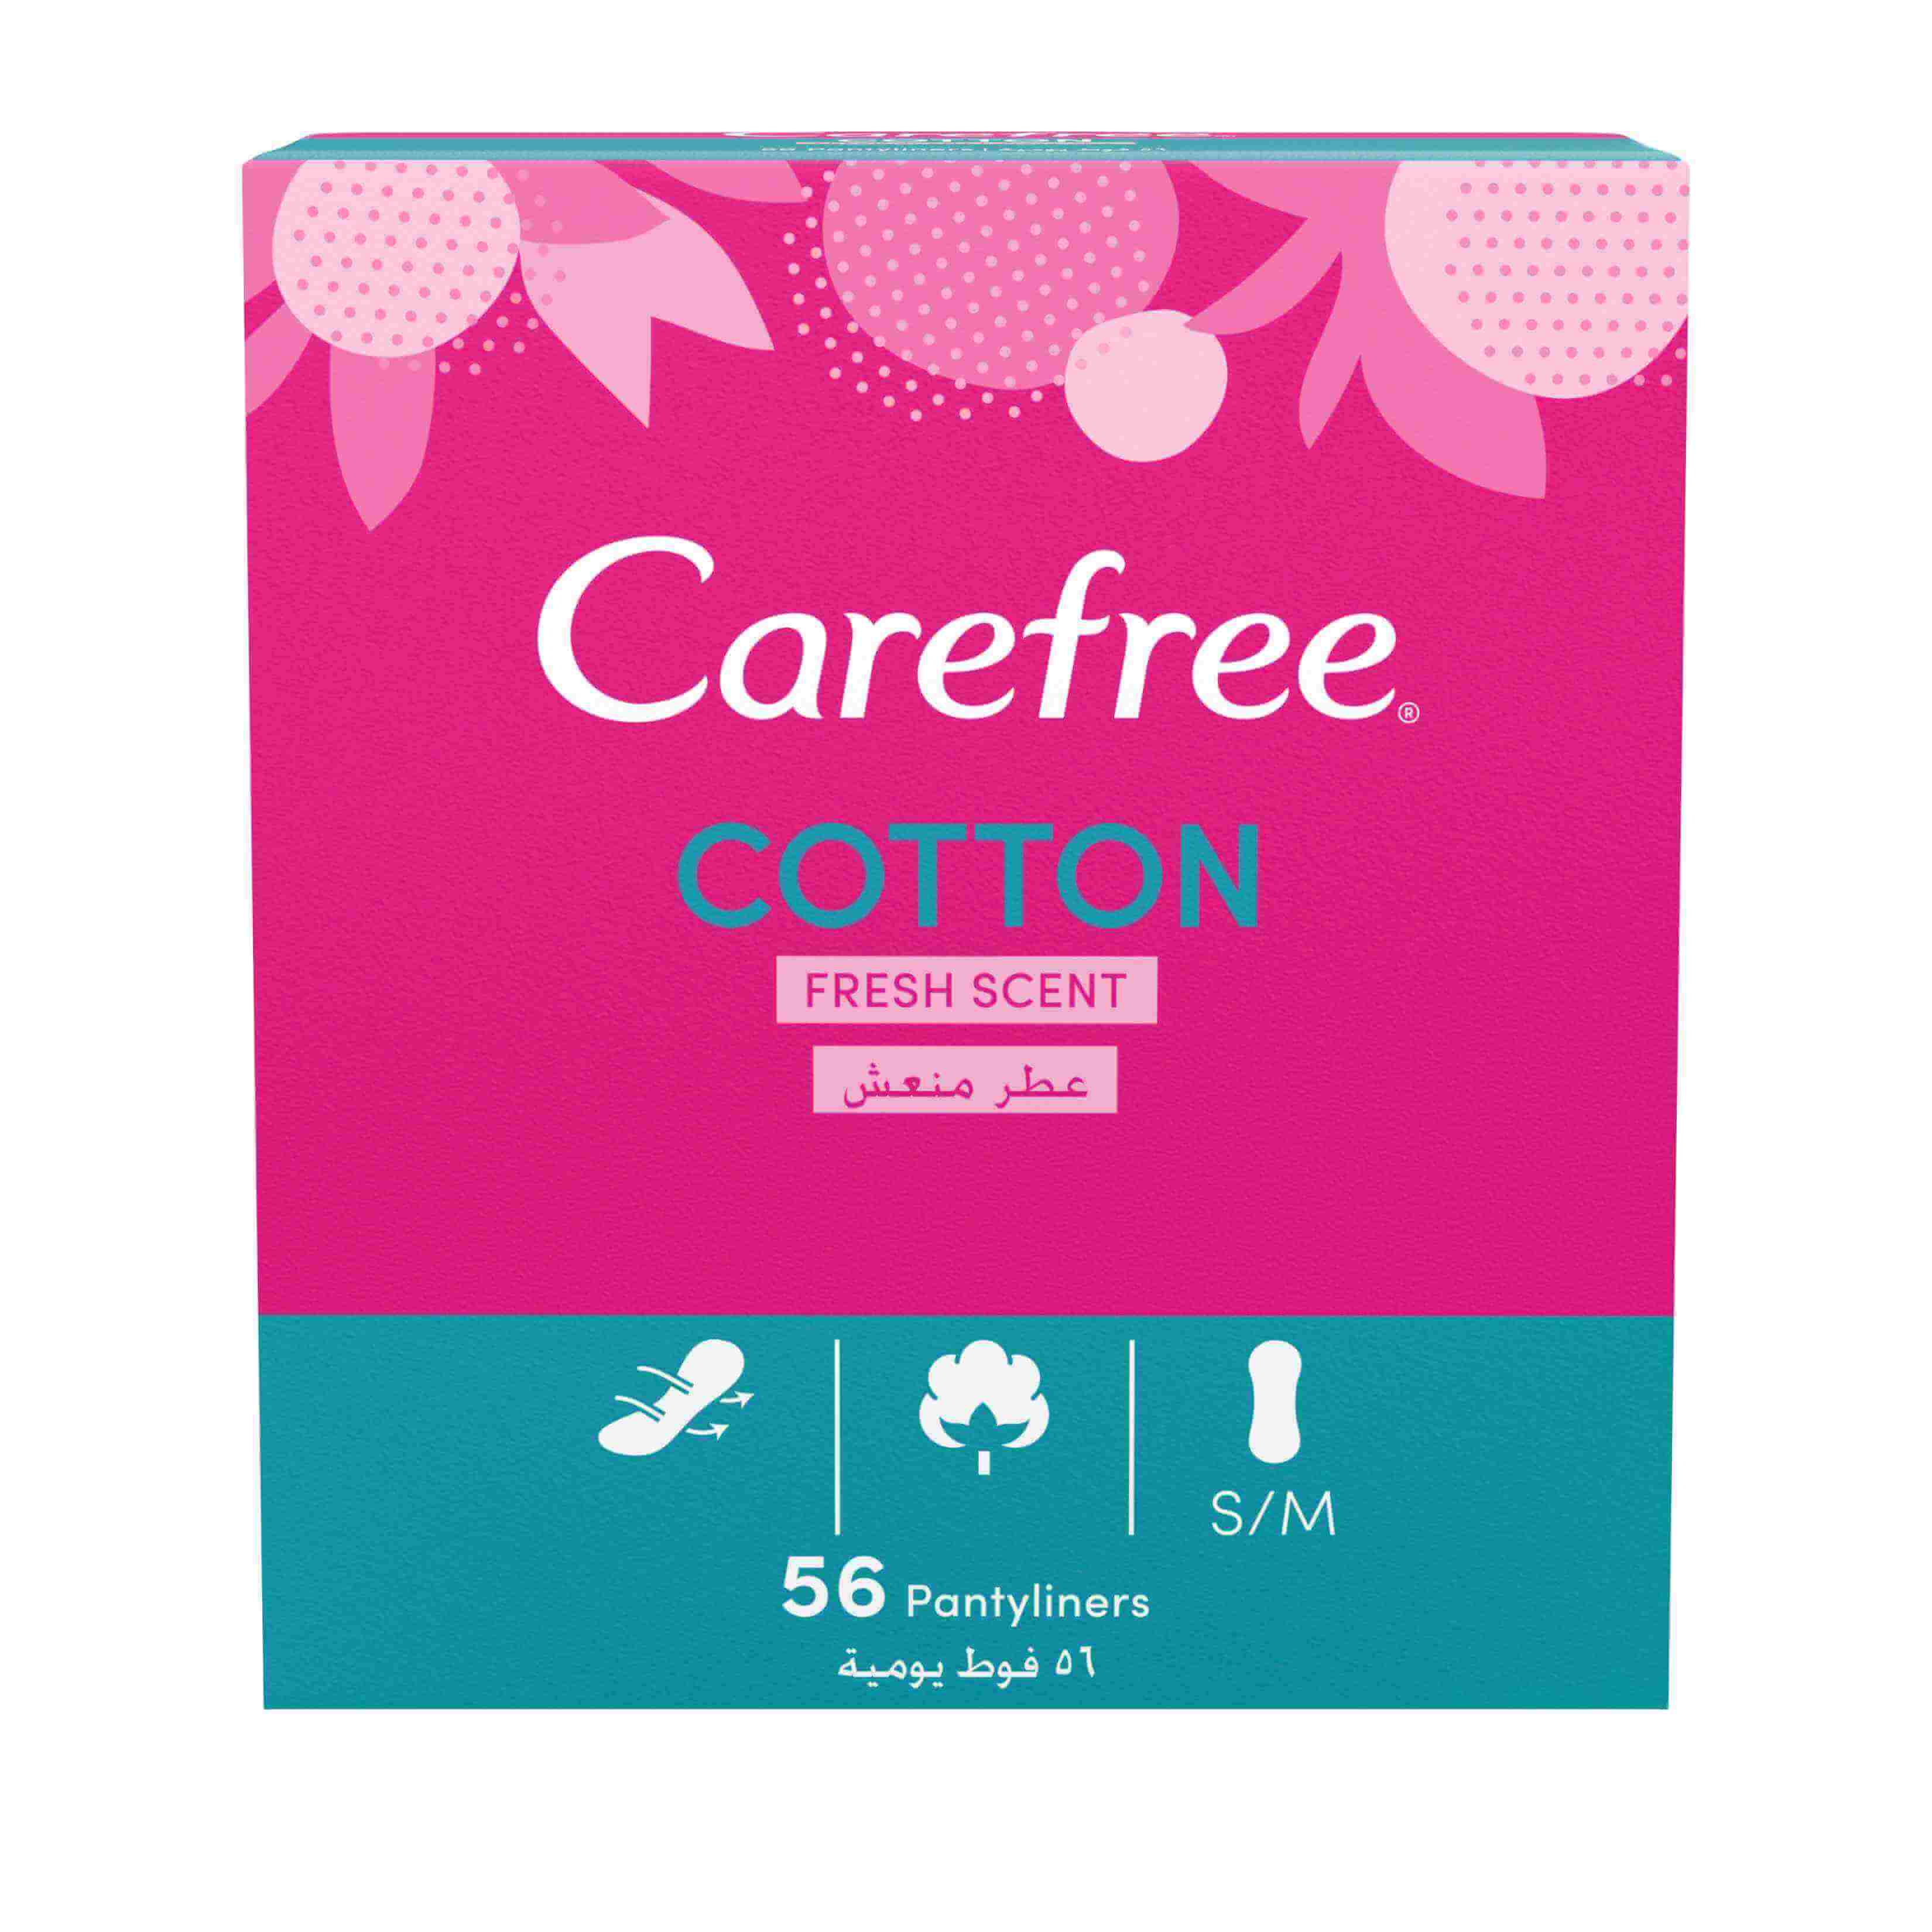 https://www.carefreearabia.com/sites/carefree_menap/files/product-images/carefree-cotton-feel-fresh-scent-56.jpg